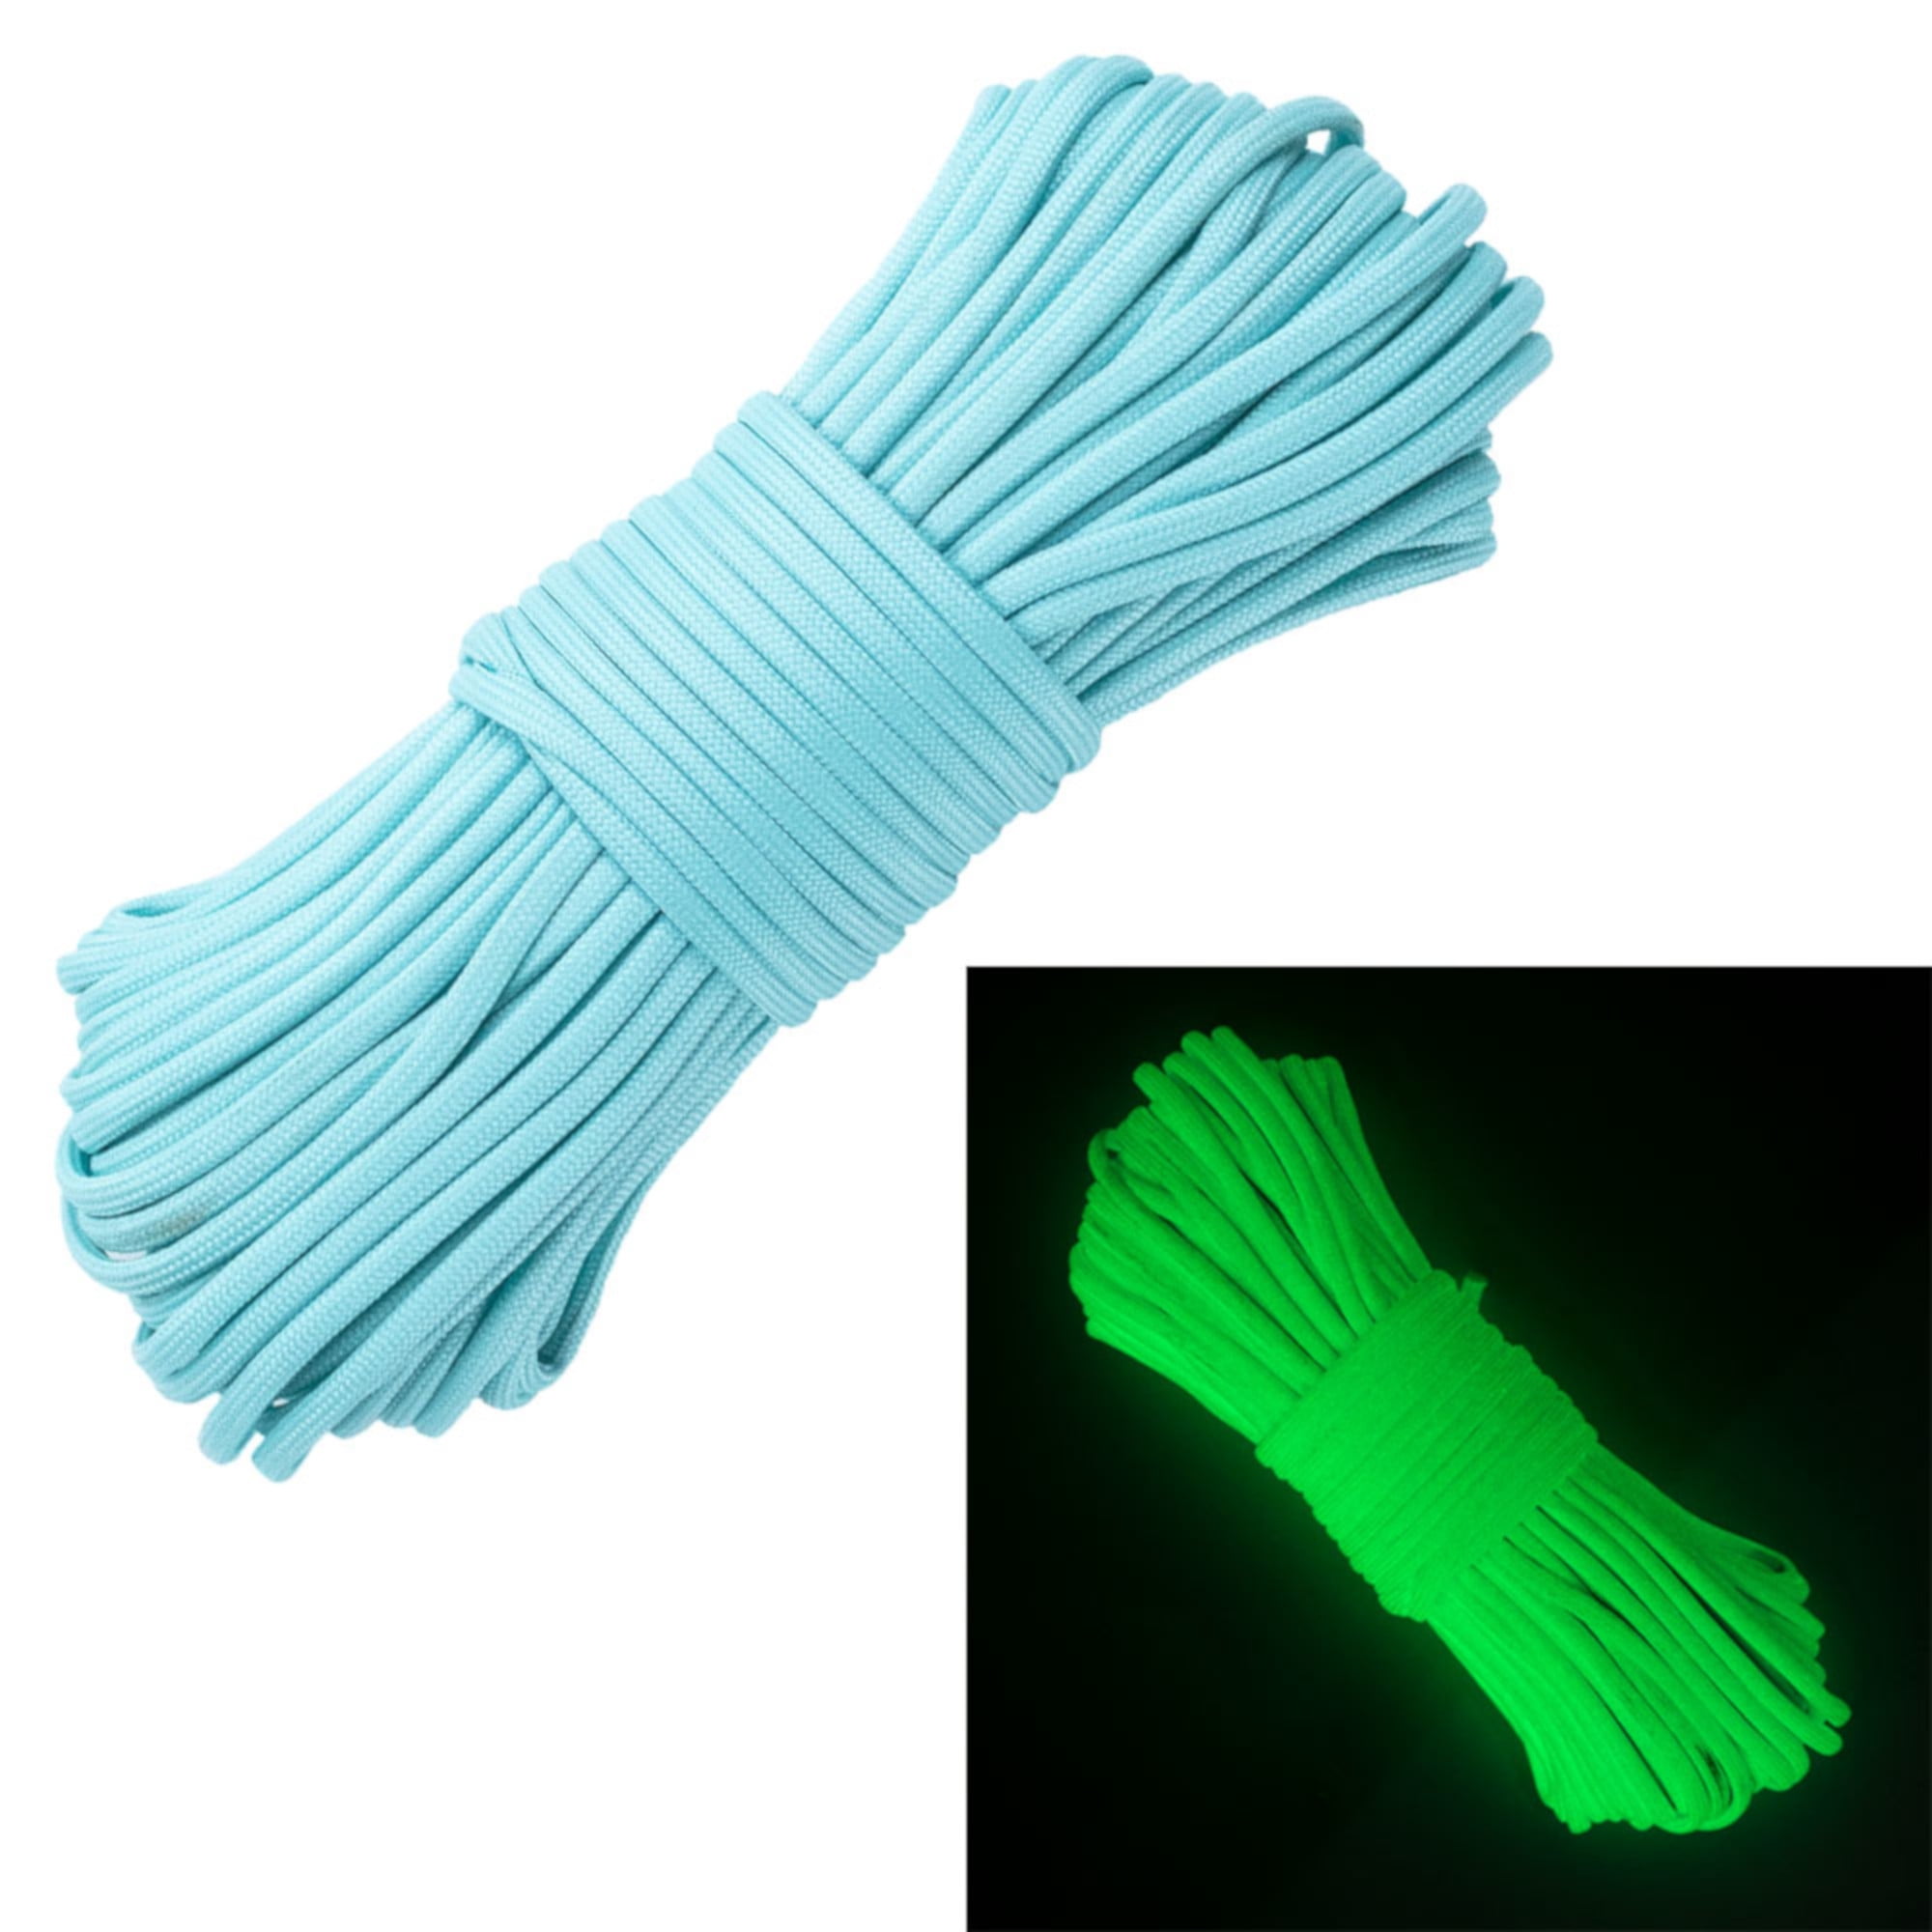 16FT-100FT 550 Paracord Parachute Cord Luminous Glow in the Dark 7 Core Strand